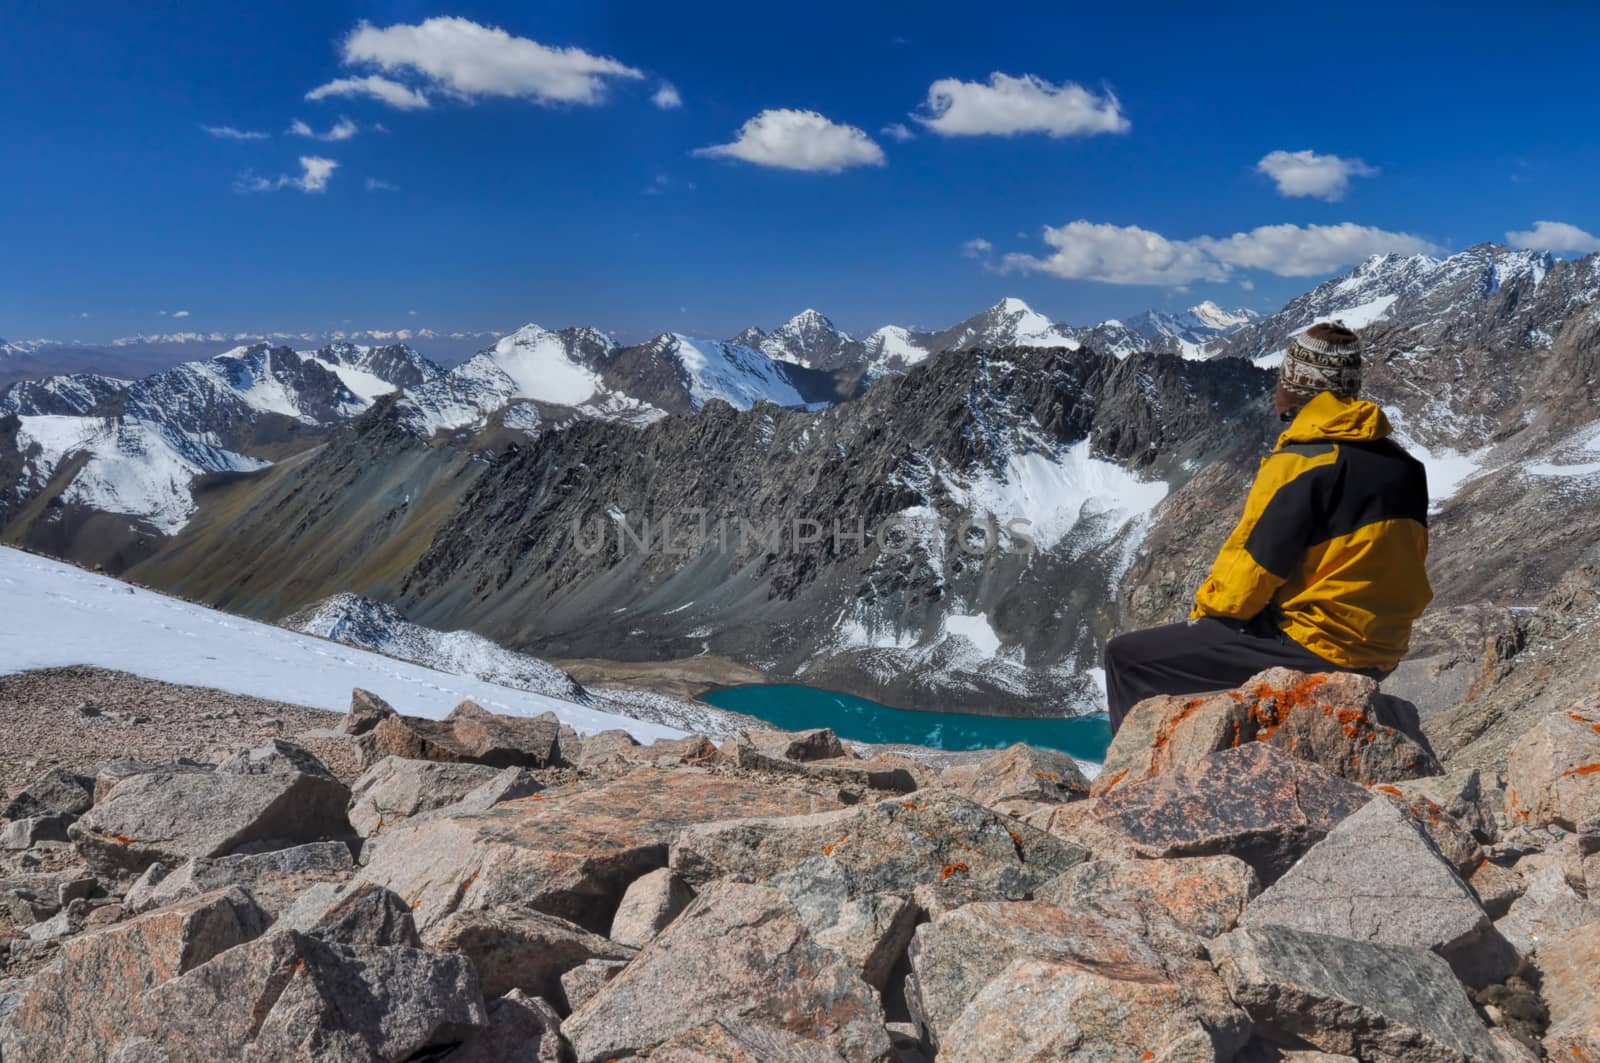 Young hiker on mountain summit in scenic Tian Shan range in Kyrgyzstan, Ala Archa national park